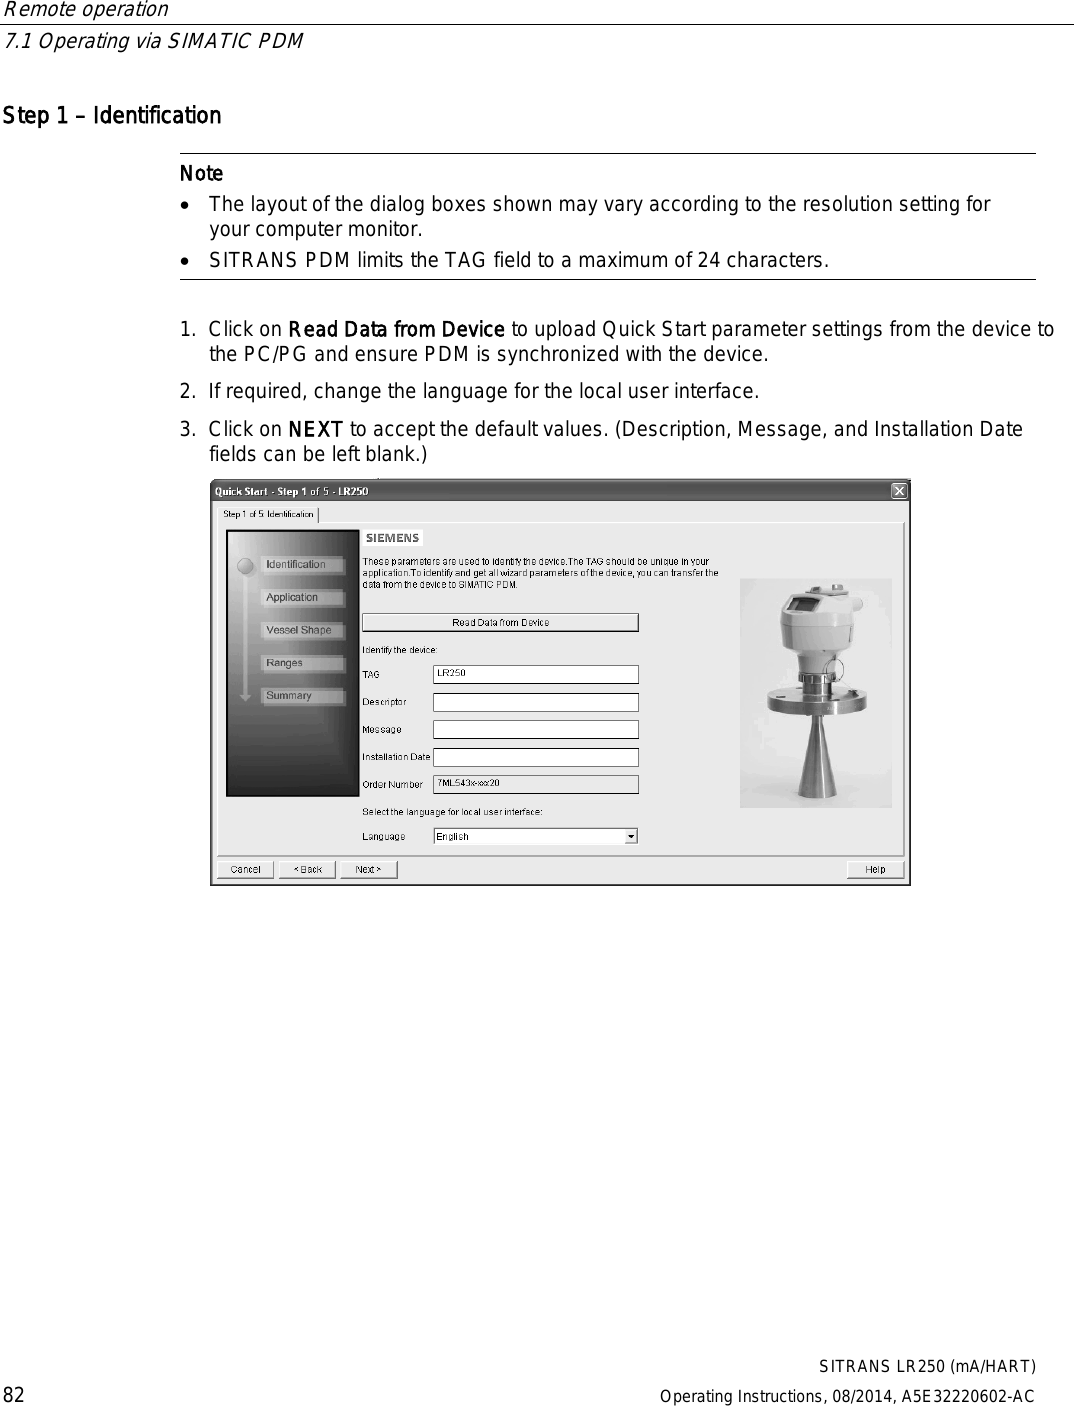 Remote operation   7.1 Operating via SIMATIC PDM  SITRANS LR250 (mA/HART) 82 Operating Instructions, 08/2014, A5E32220602-AC Step 1 – Identification   Note • The layout of the dialog boxes shown may vary according to the resolution setting for your computer monitor. • SITRANS PDM limits the TAG field to a maximum of 24 characters.  1. Click on Read Data from Device to upload Quick Start parameter settings from the device to the PC/PG and ensure PDM is synchronized with the device. 2. If required, change the language for the local user interface. 3. Click on NEXT to accept the default values. (Description, Message, and Installation Date fields can be left blank.)  